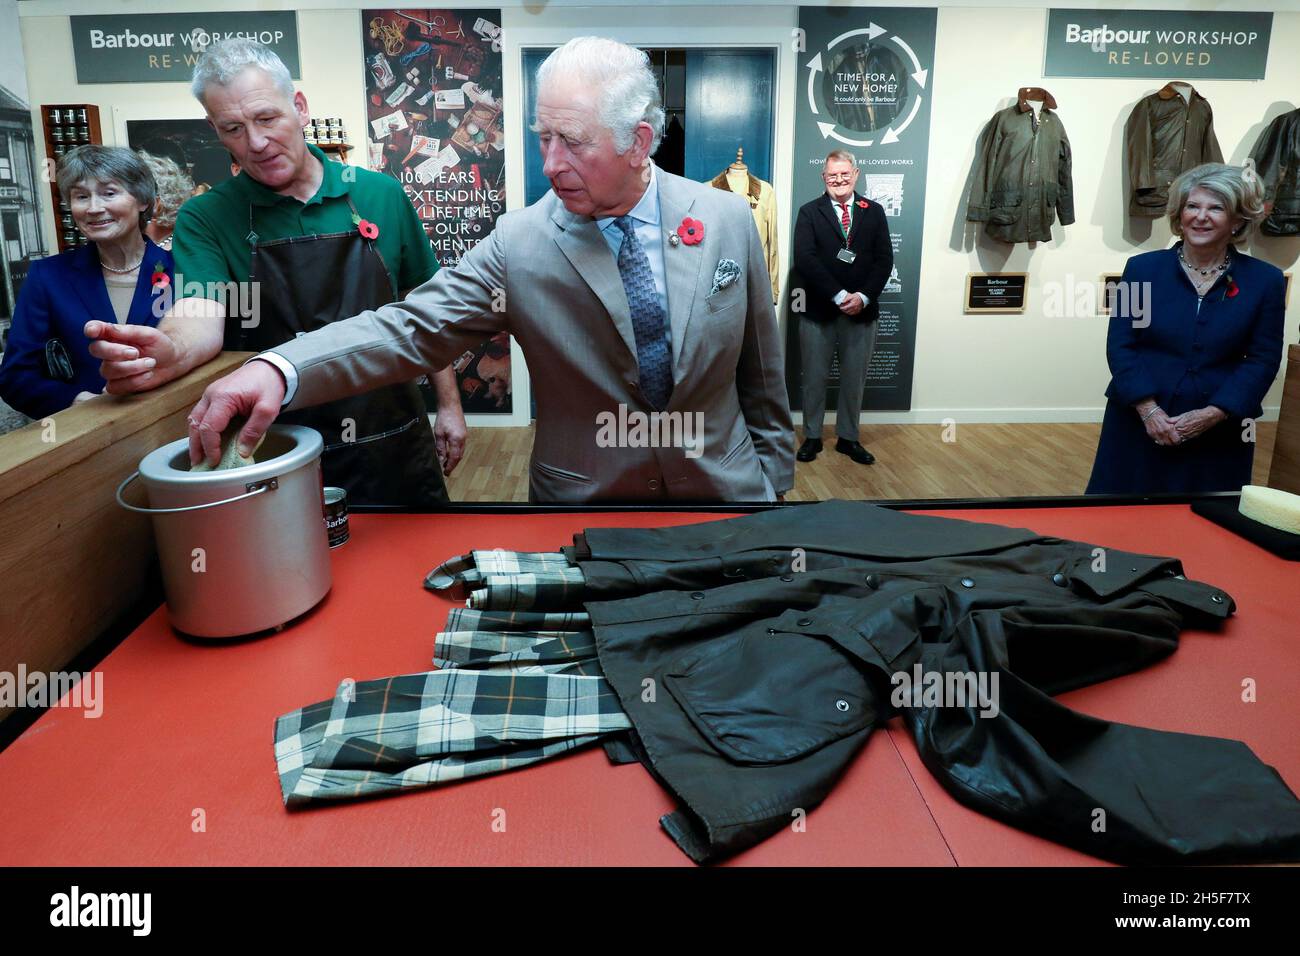 Britain's Prince Charles has a go at reproofing a jacket during his visit  to Royal Warrant Holder, J Barbour And Sons Ltd, in South Shields, Britain  November 9, 2021. Scott Heppell/Pool via